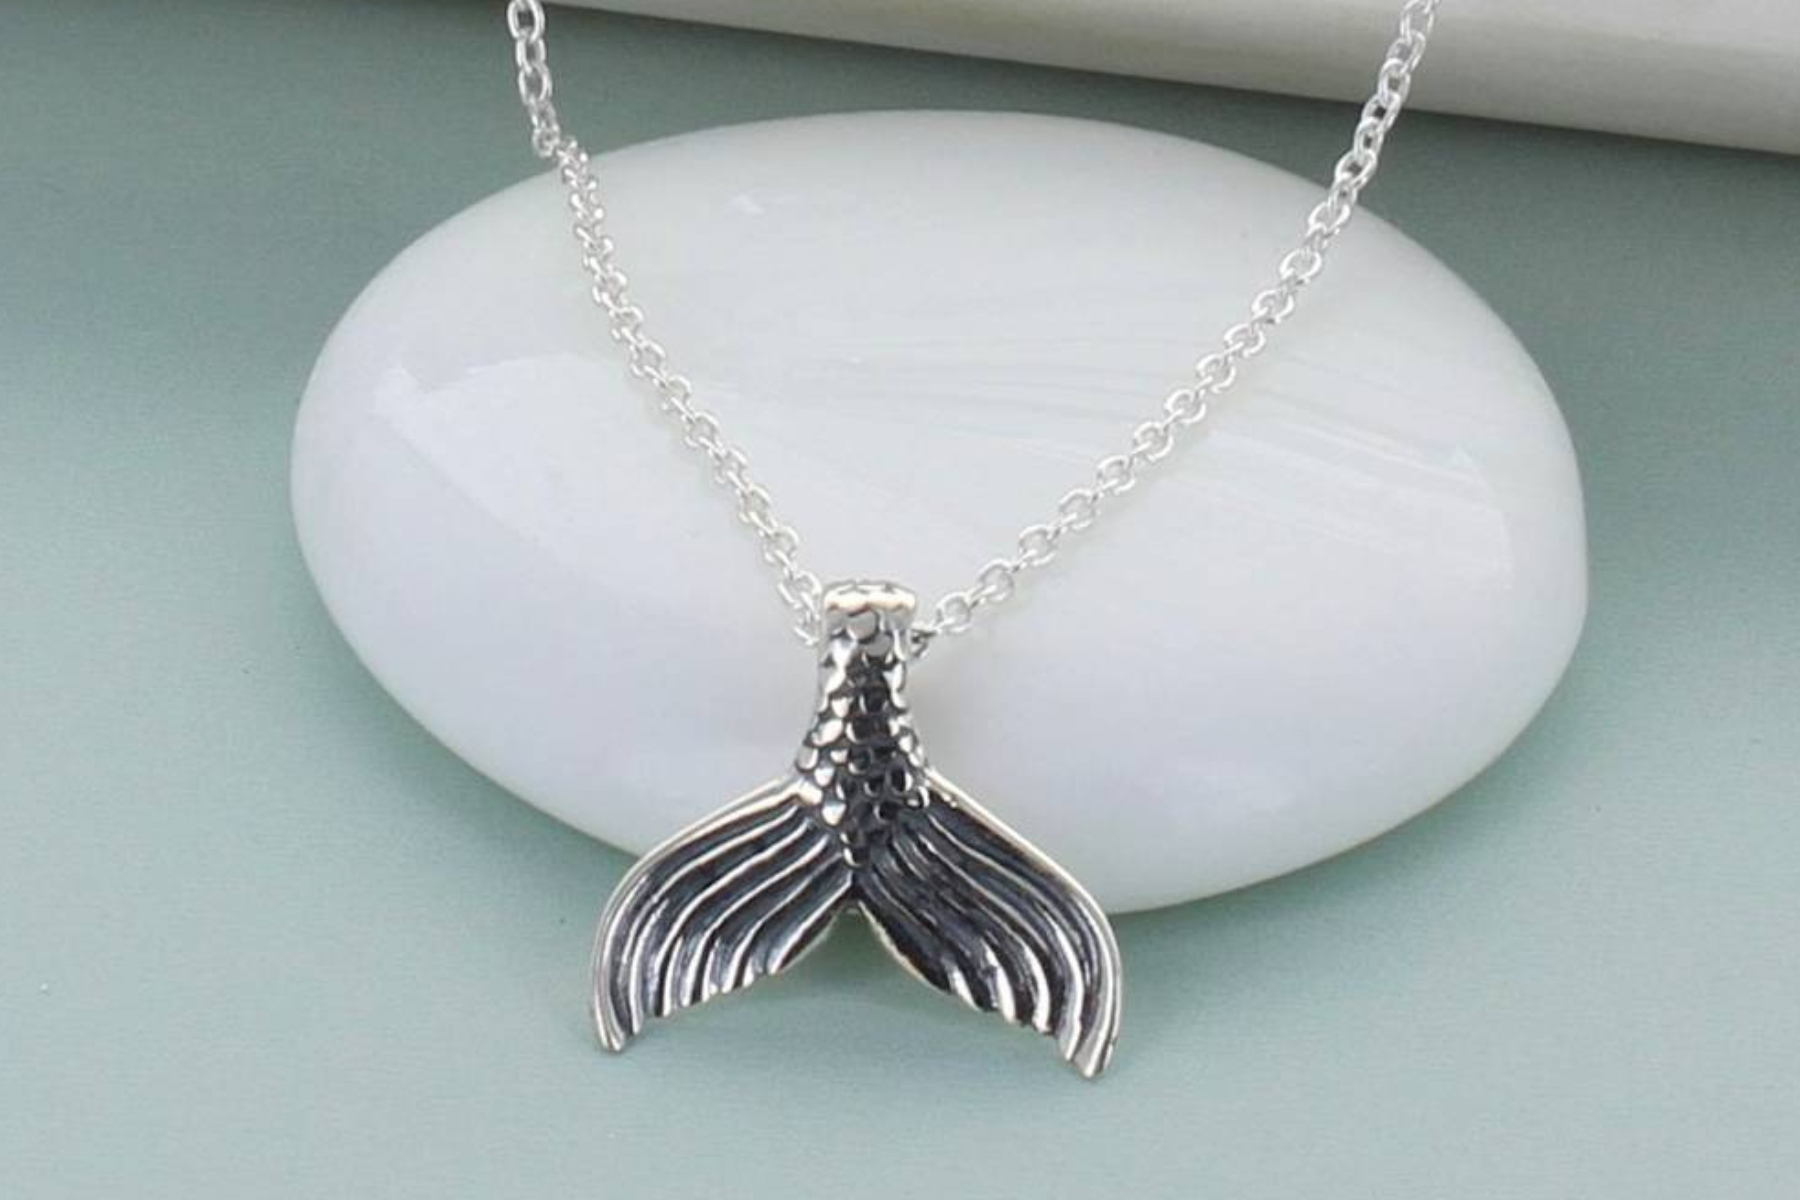 Mermaid Tail Necklaces - Perfect Accessory For Beachy Bohemian Style